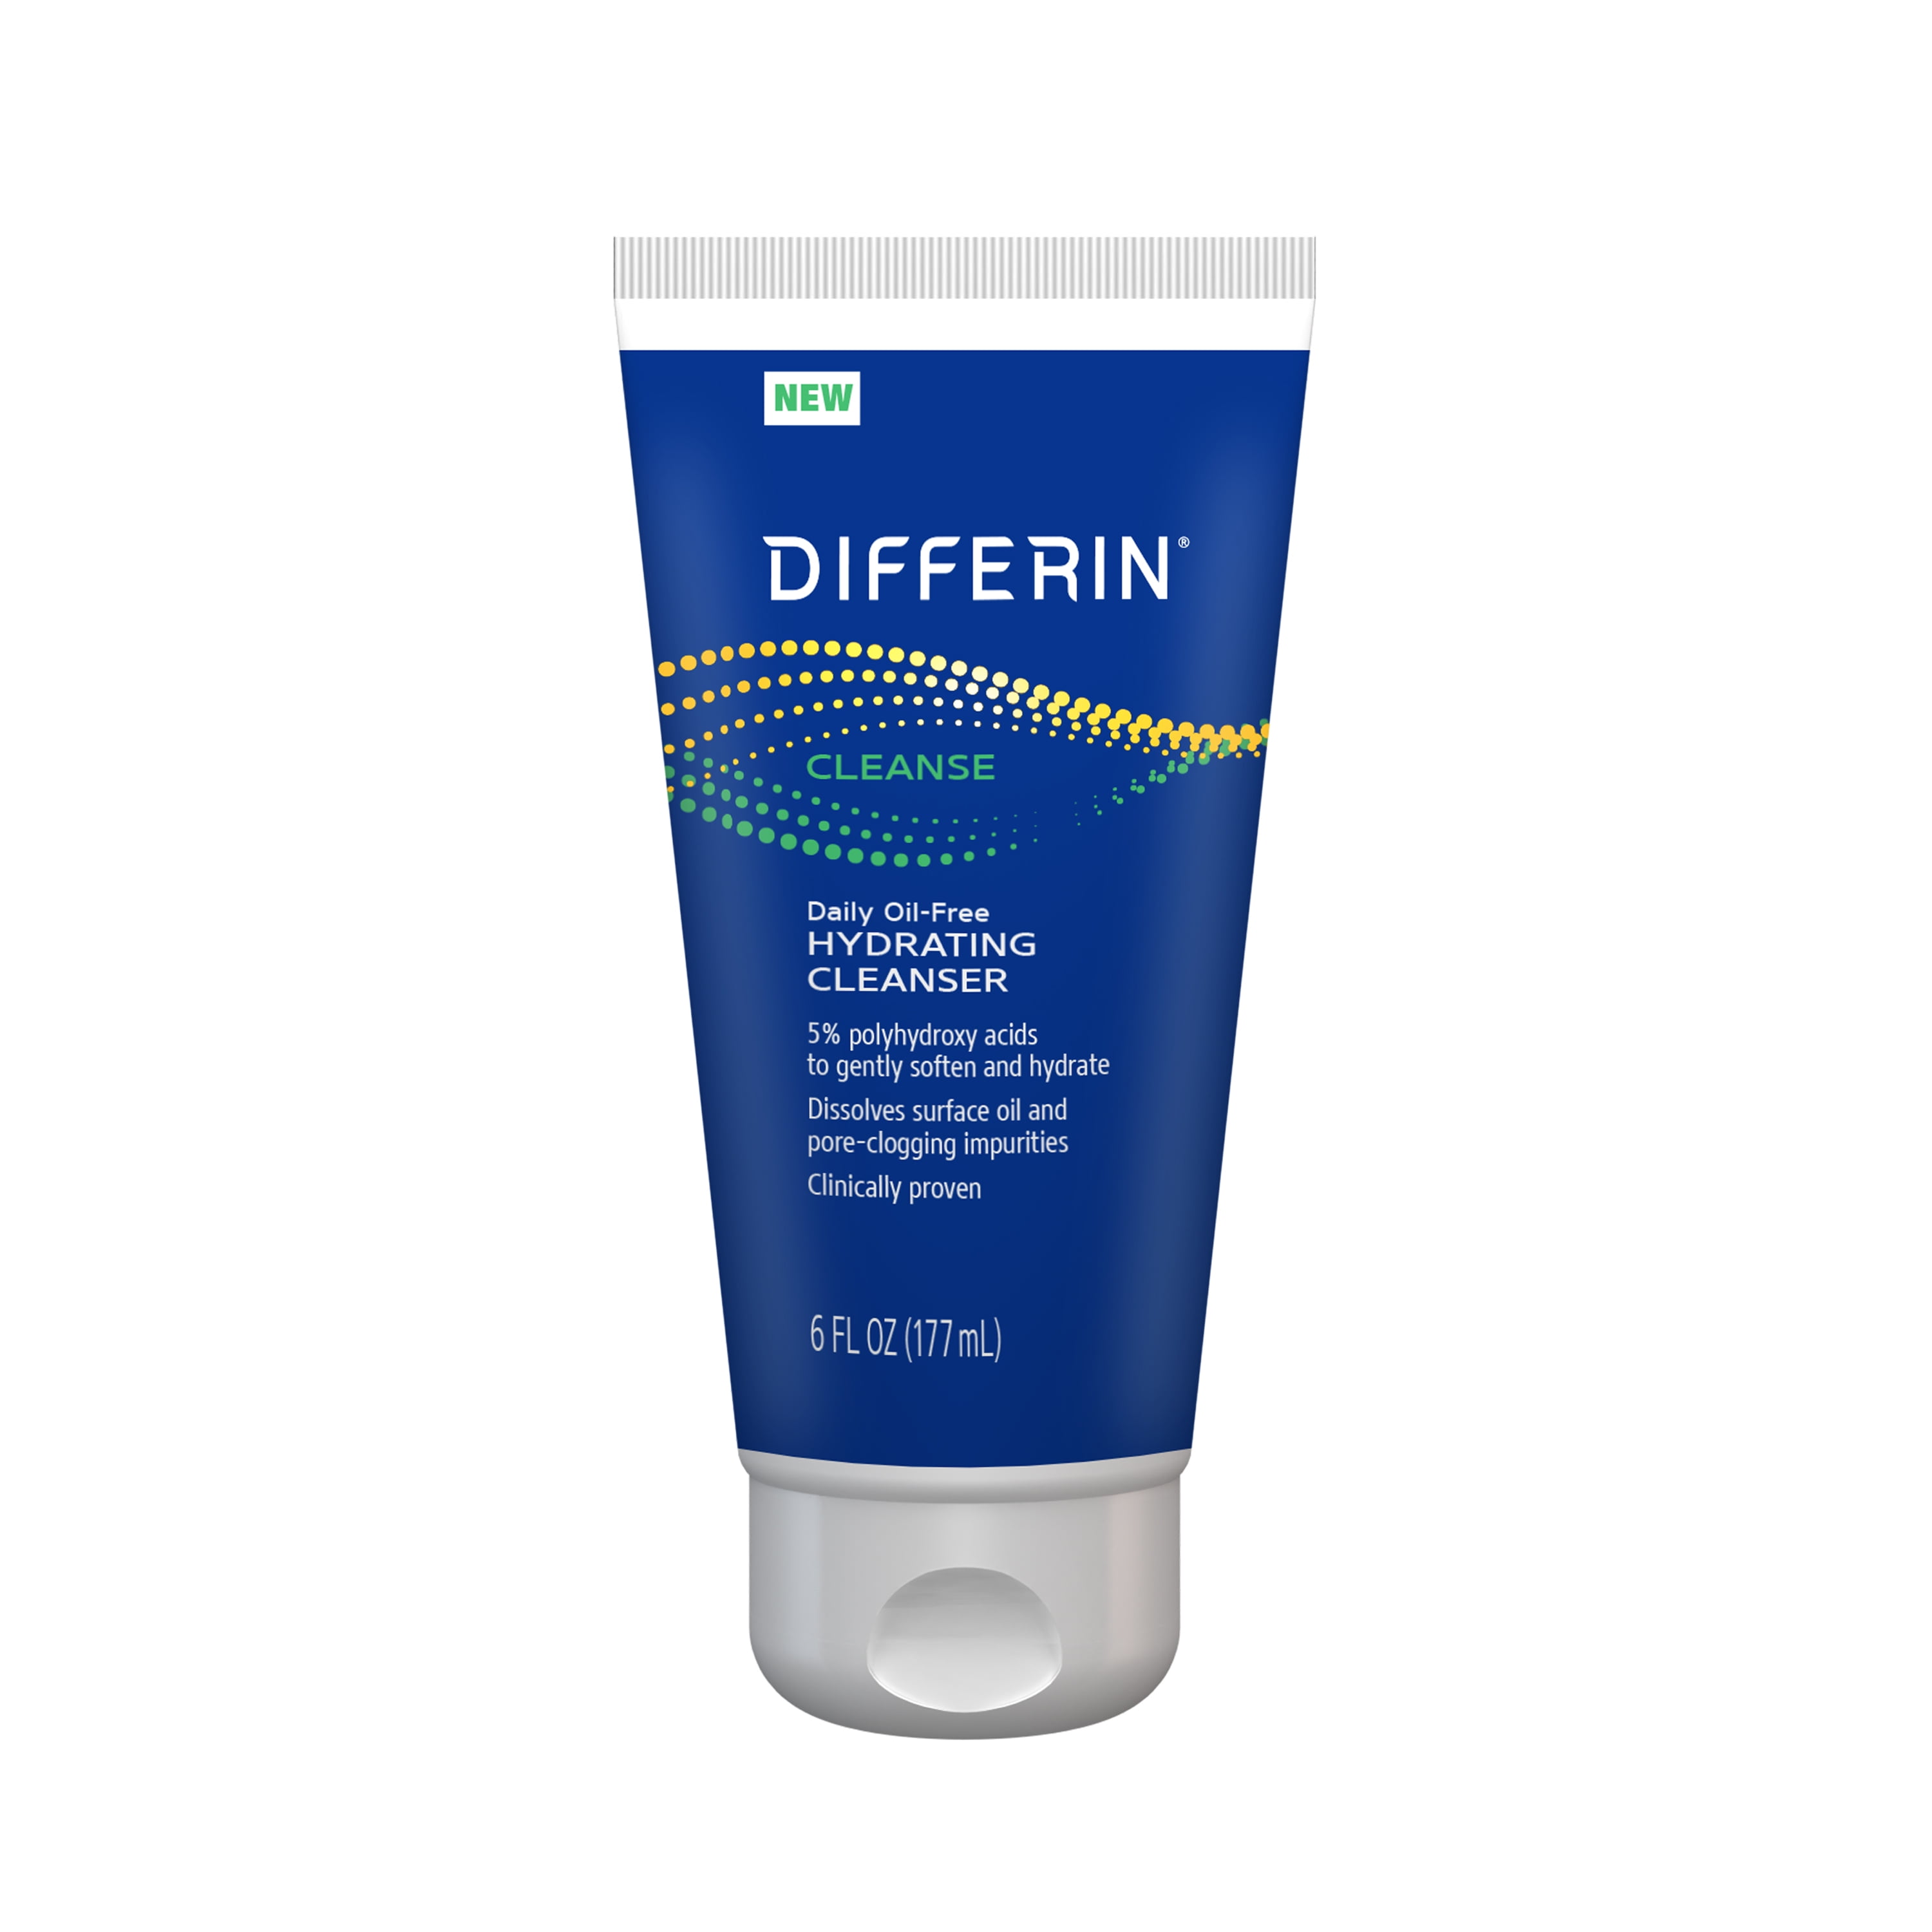 Differin Daily Oil Free Hydrating Cleanser, Gentle Face Wash for Acne Prone Skin, 6 oz